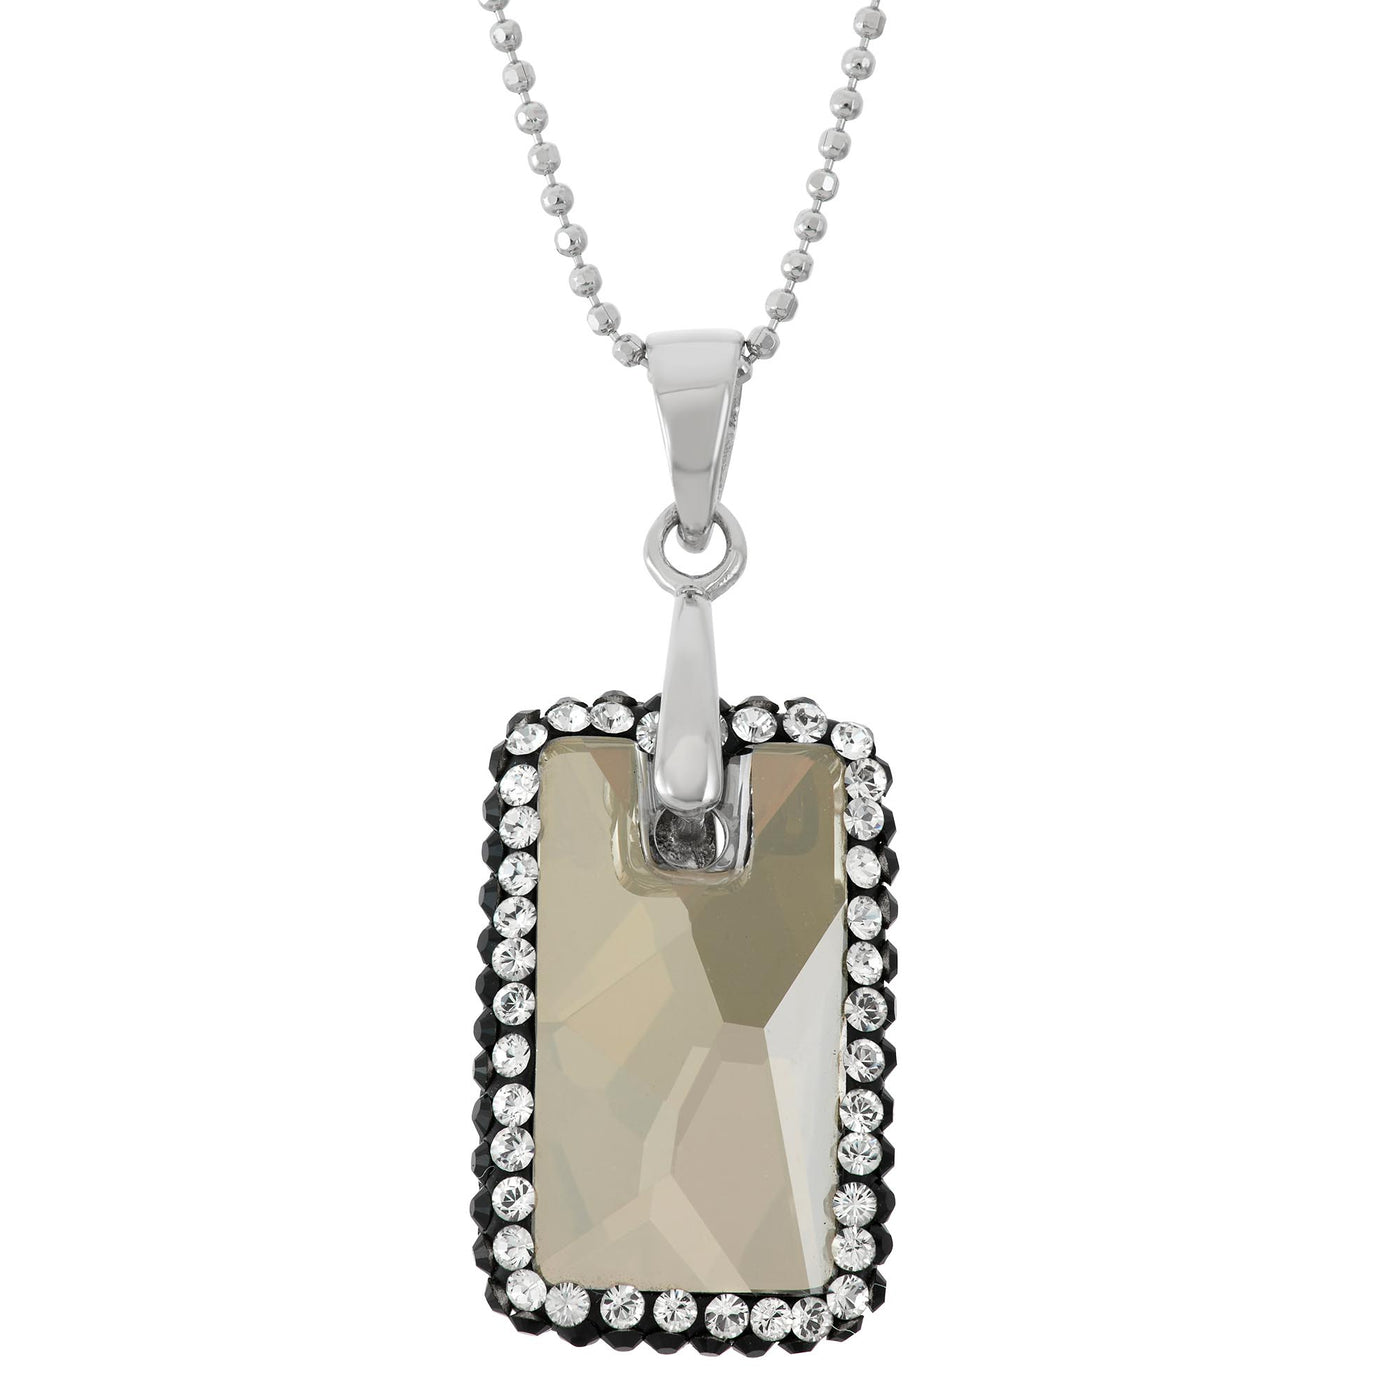 Rebecca Sloane Silver Rectangular Crystal With Black Pave Pendant